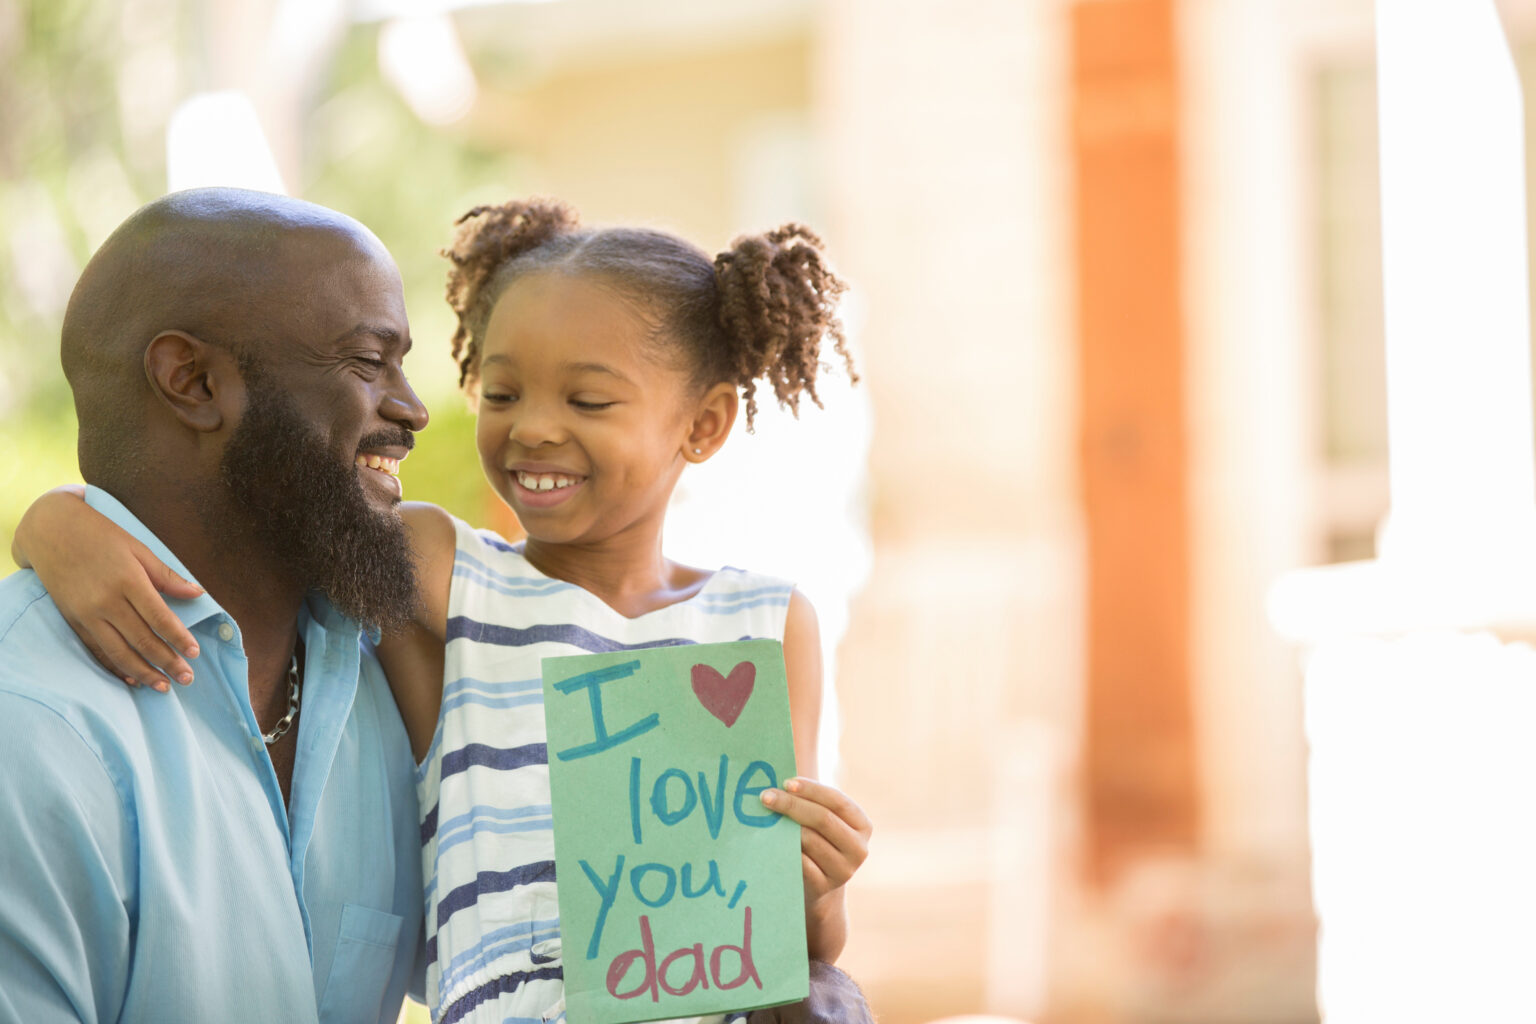 Mother's Day is here, meaning it won't be long until Father's Day rolls into 2021. Get a head-start on picking a gift for Dad with these ideas now!